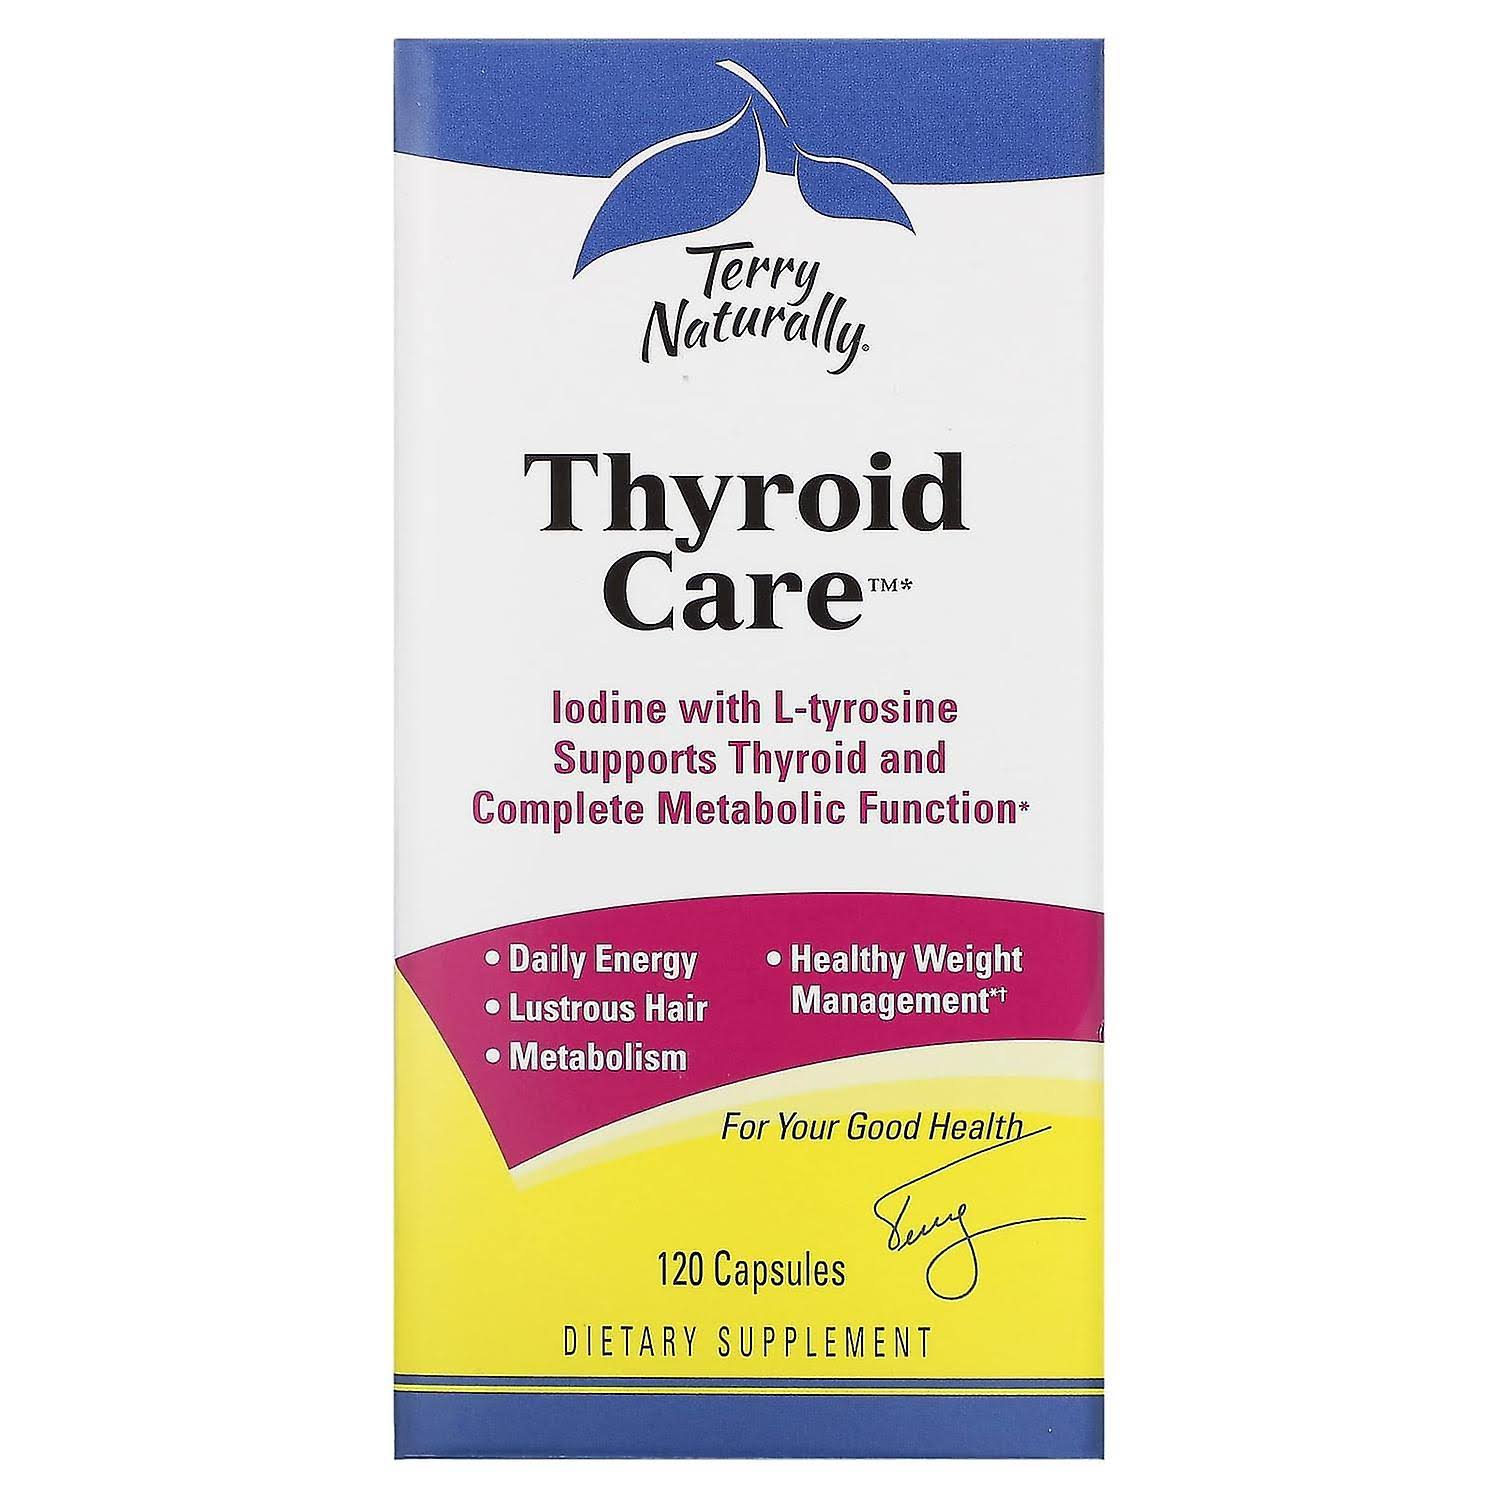 Terry Naturally Thyroid Care Dietary Supplement - 120 Capsules